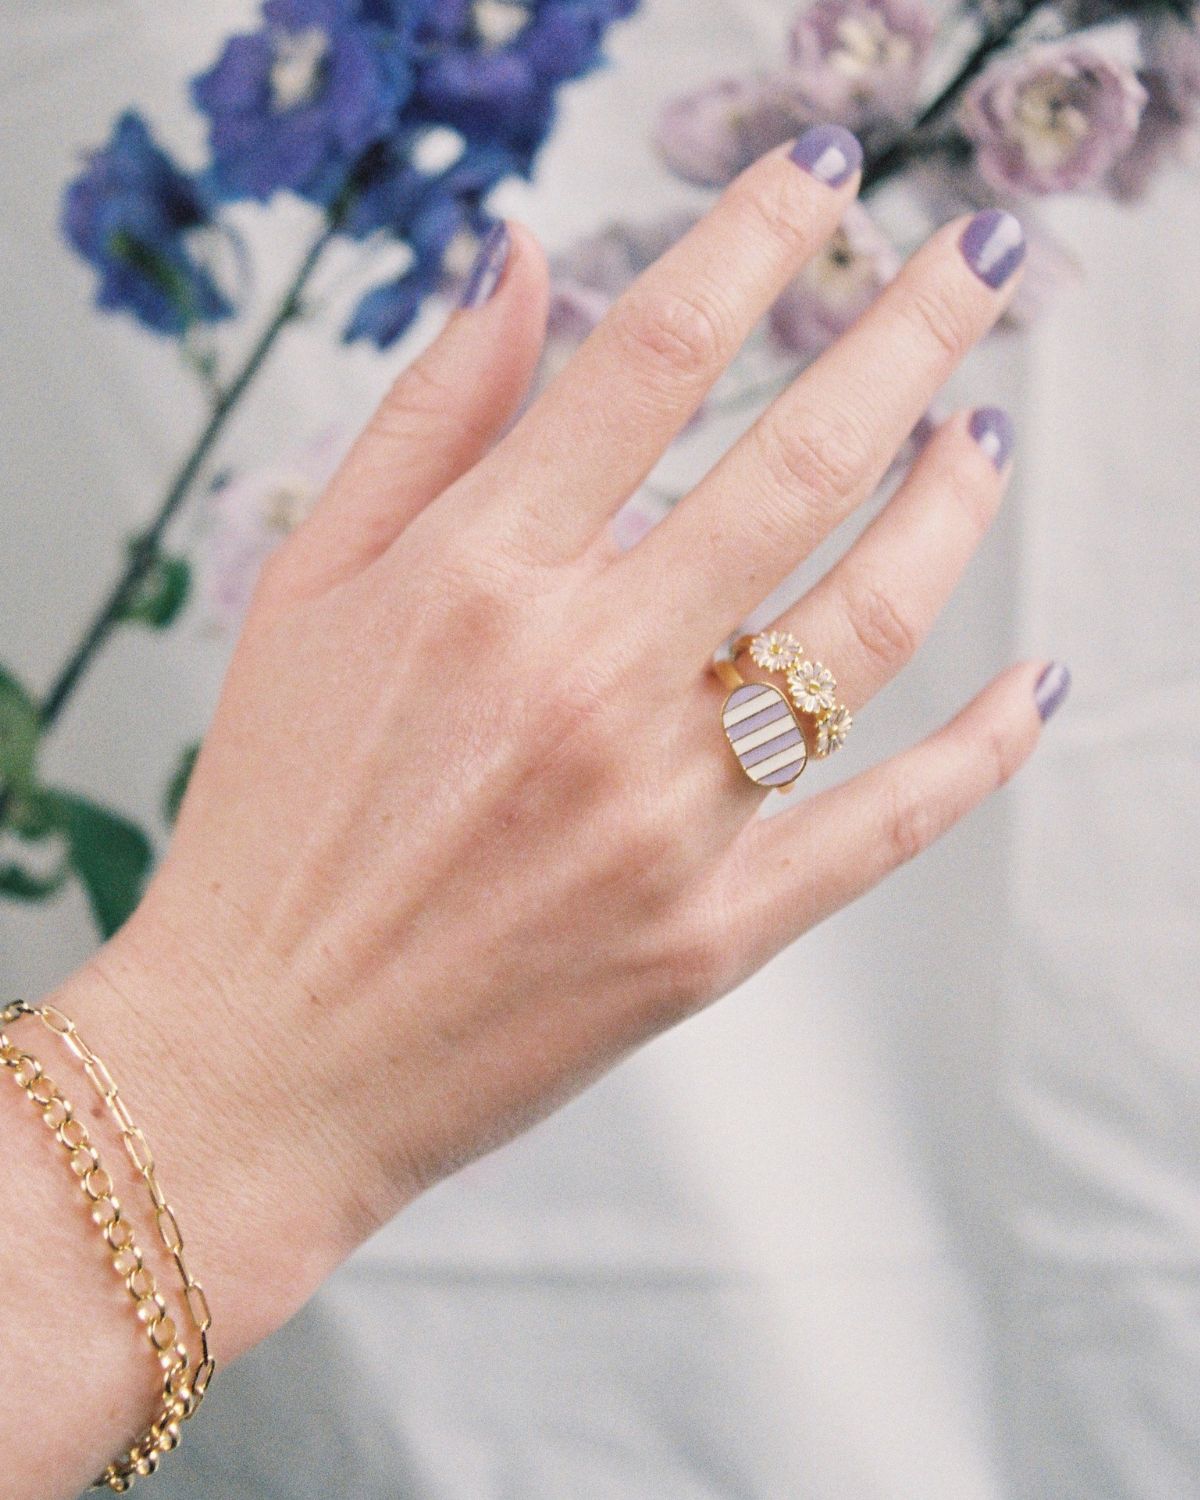 Busy bee ring - gold vermeil